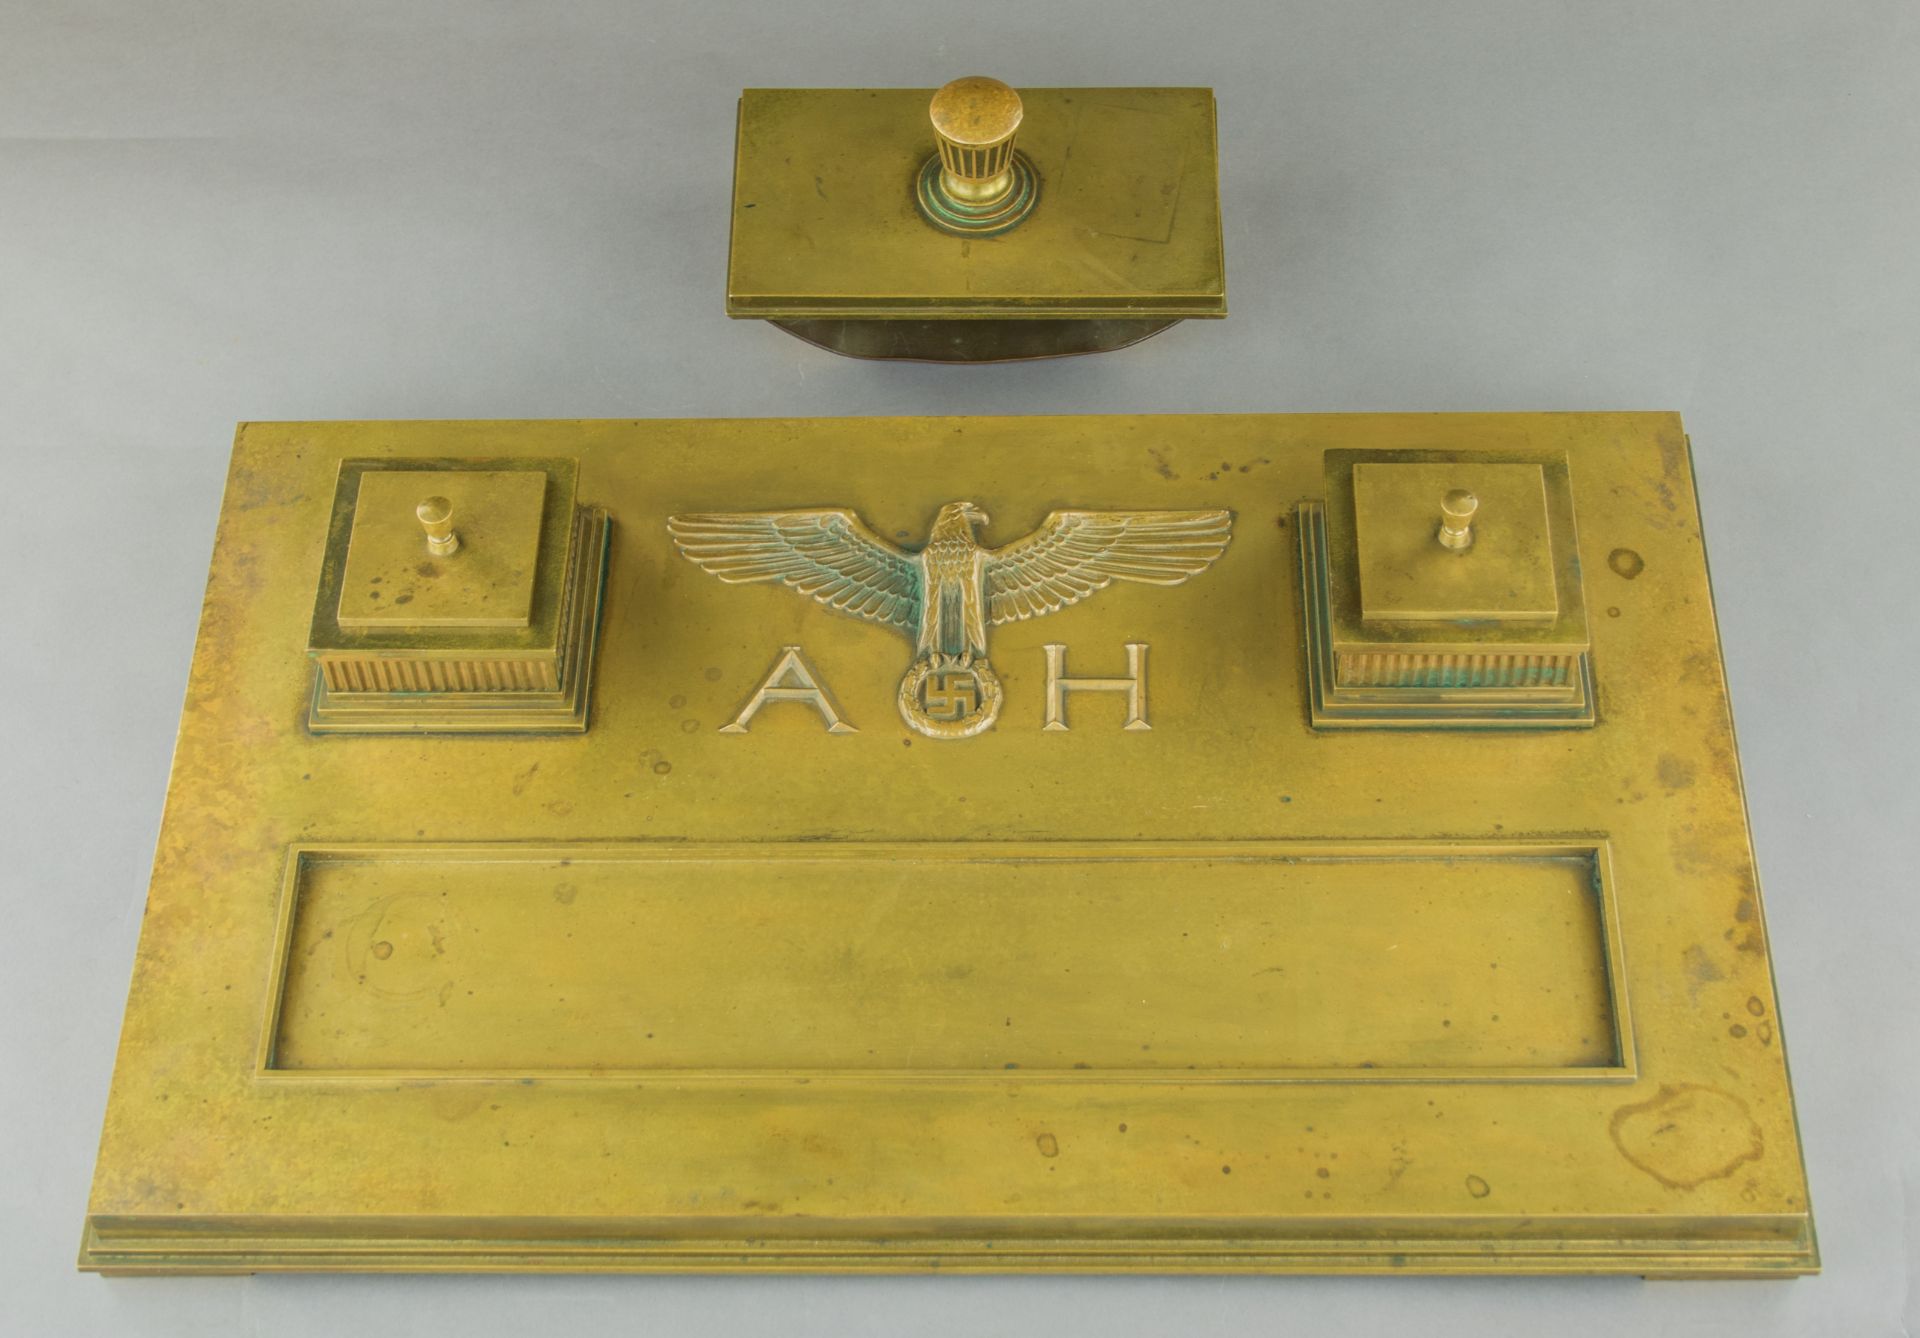 ADOLF HITLER'S CEREMONIAL DESK SET - USED IN THE SIGNING OF THE MUNICH PACT